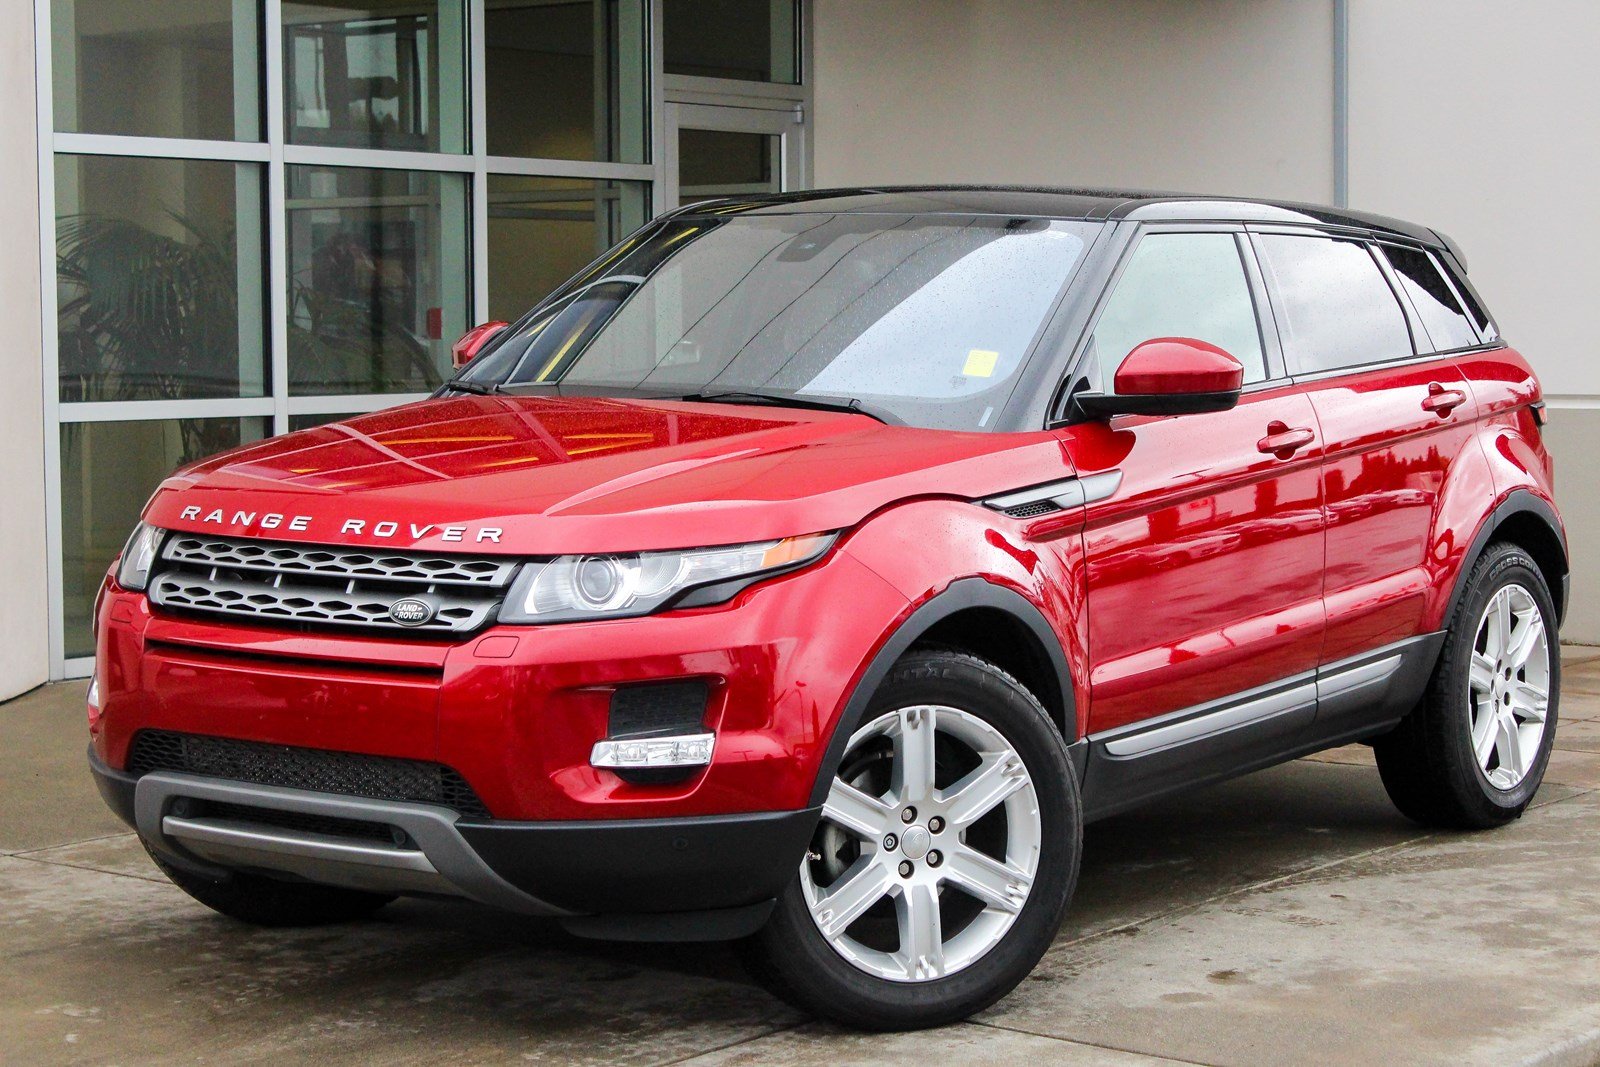 Certified Pre-Owned 2014 Land Rover Range Rover Evoque Pure Plus Sport